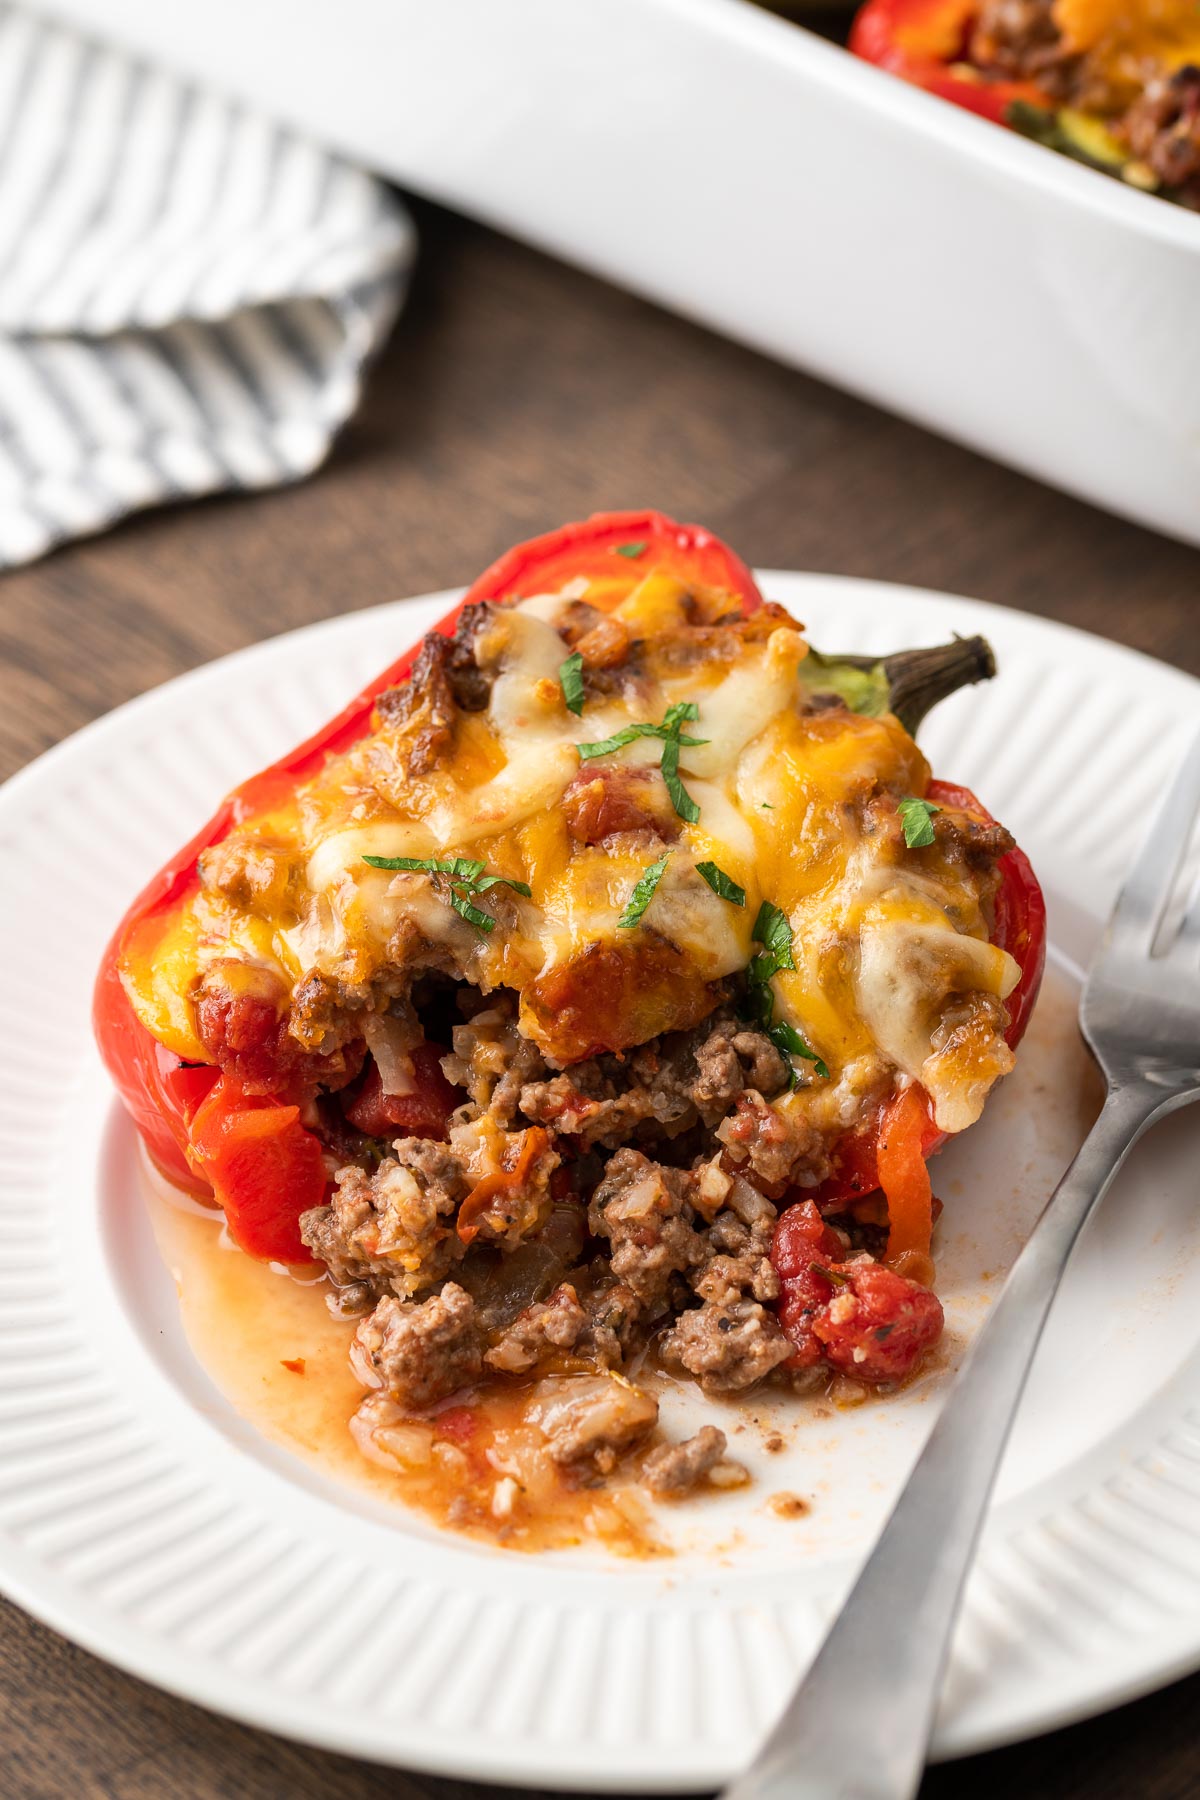 A cut open keto stuffed pepper shows the ground beef filling.